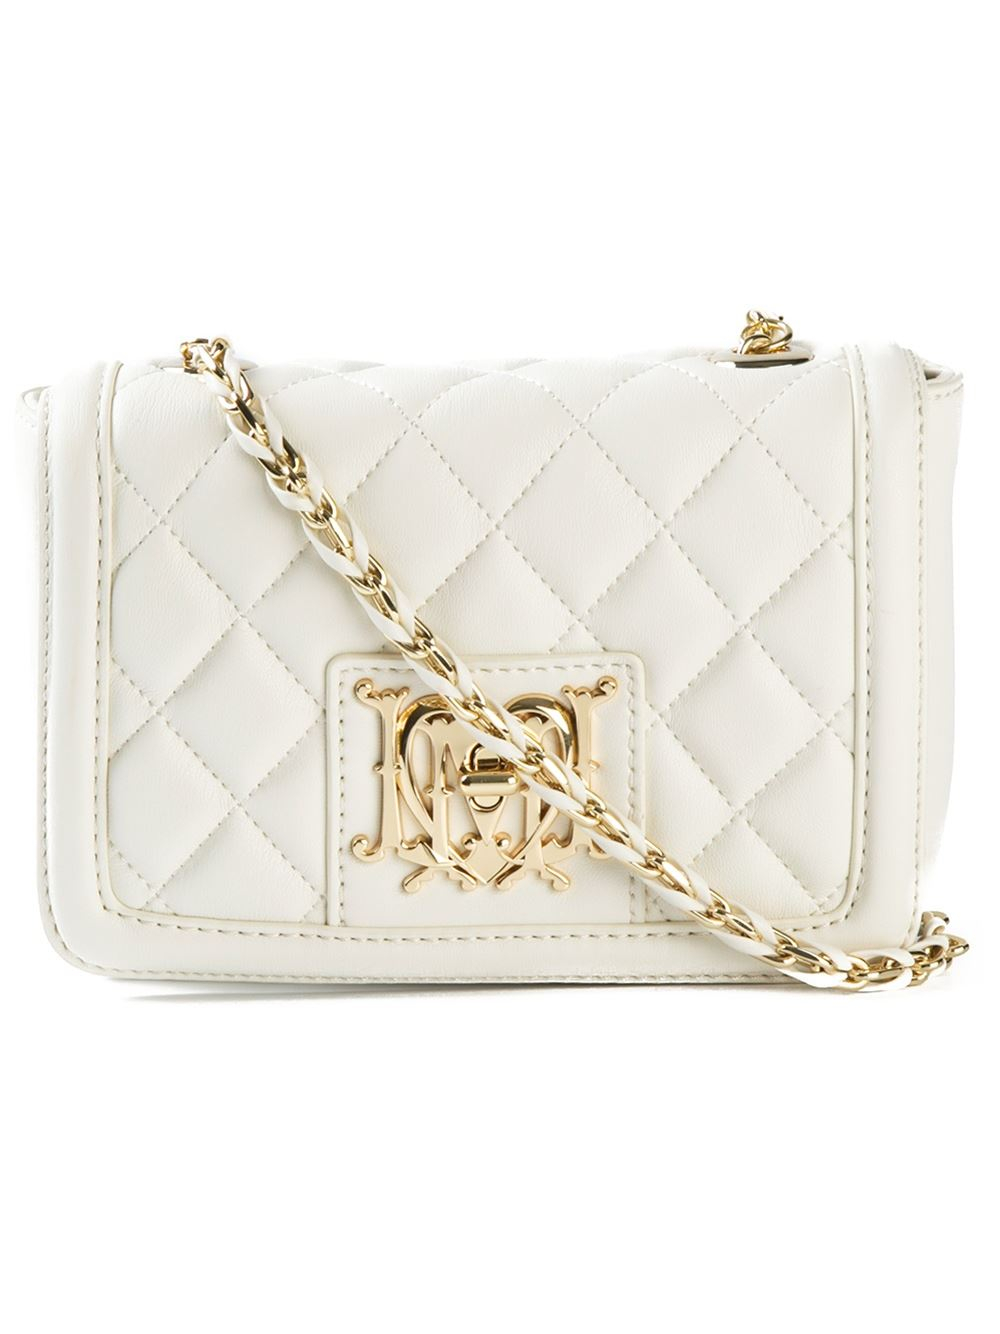 Lyst - Love Moschino Quilted-Leather Cross-Body Bag in White